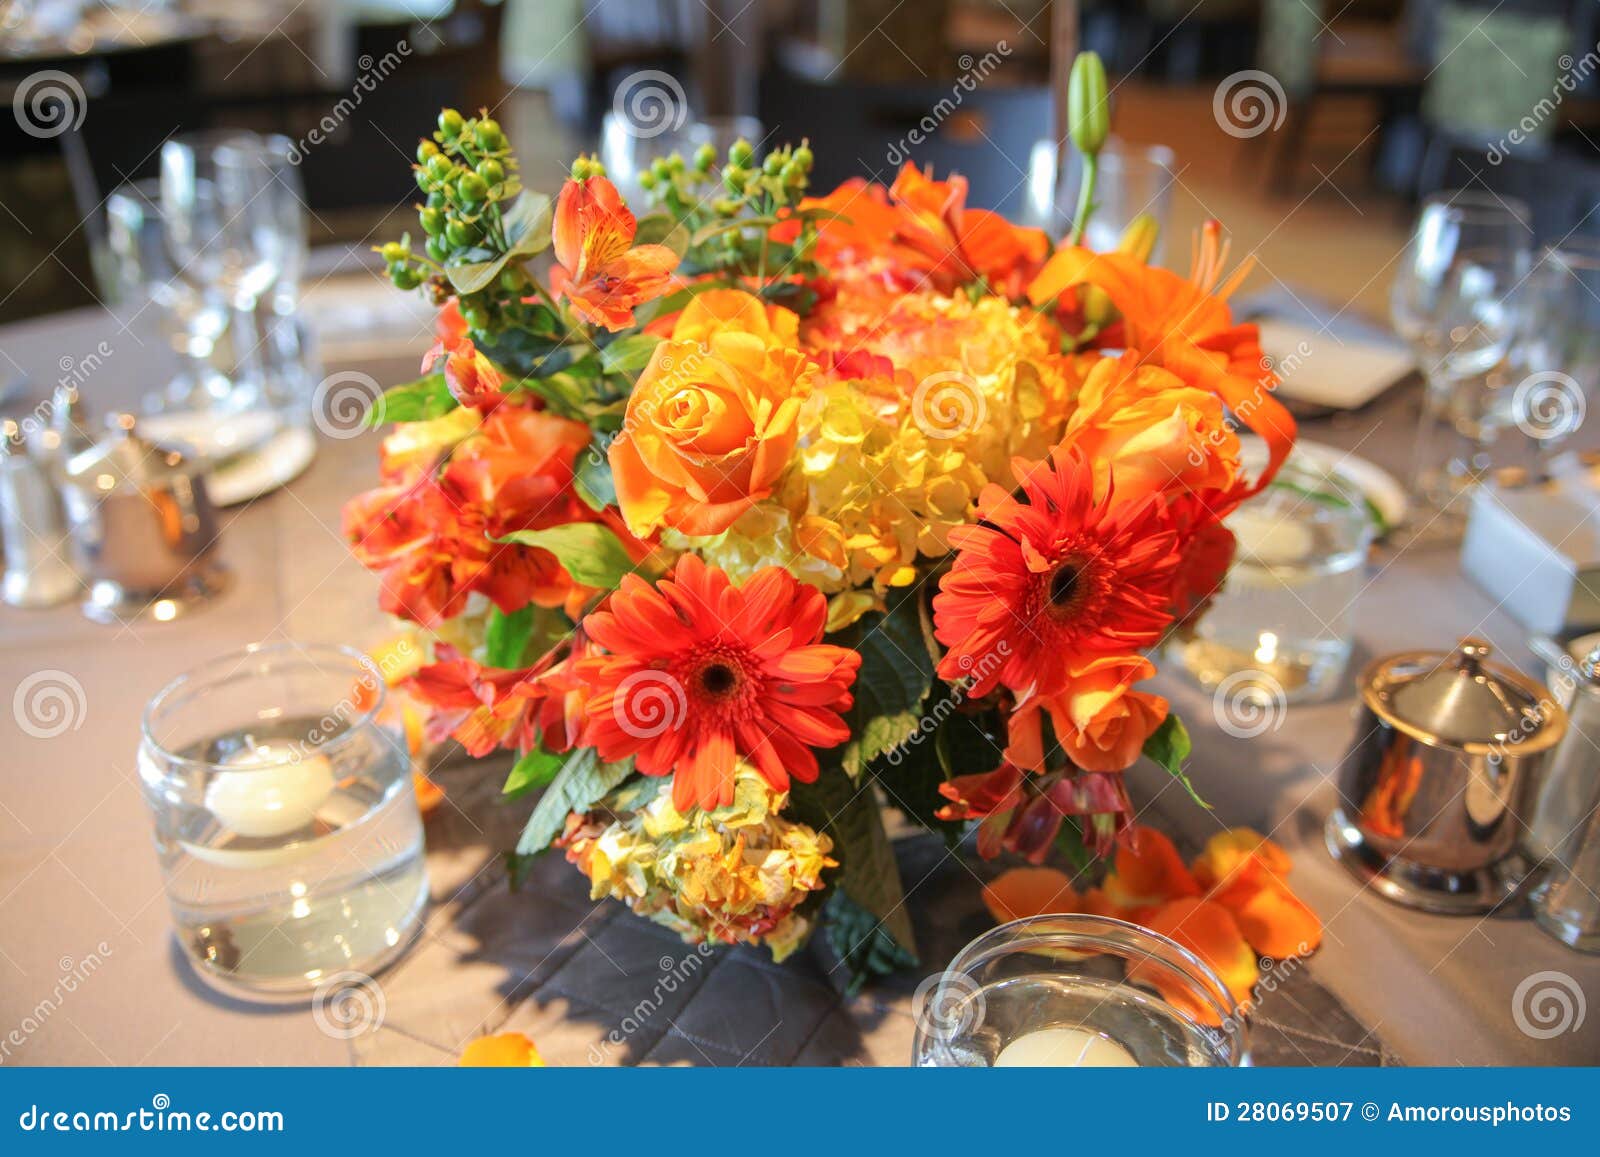 Flower Centerpiece Stock Image Image Of Oeuvre Table 28069507